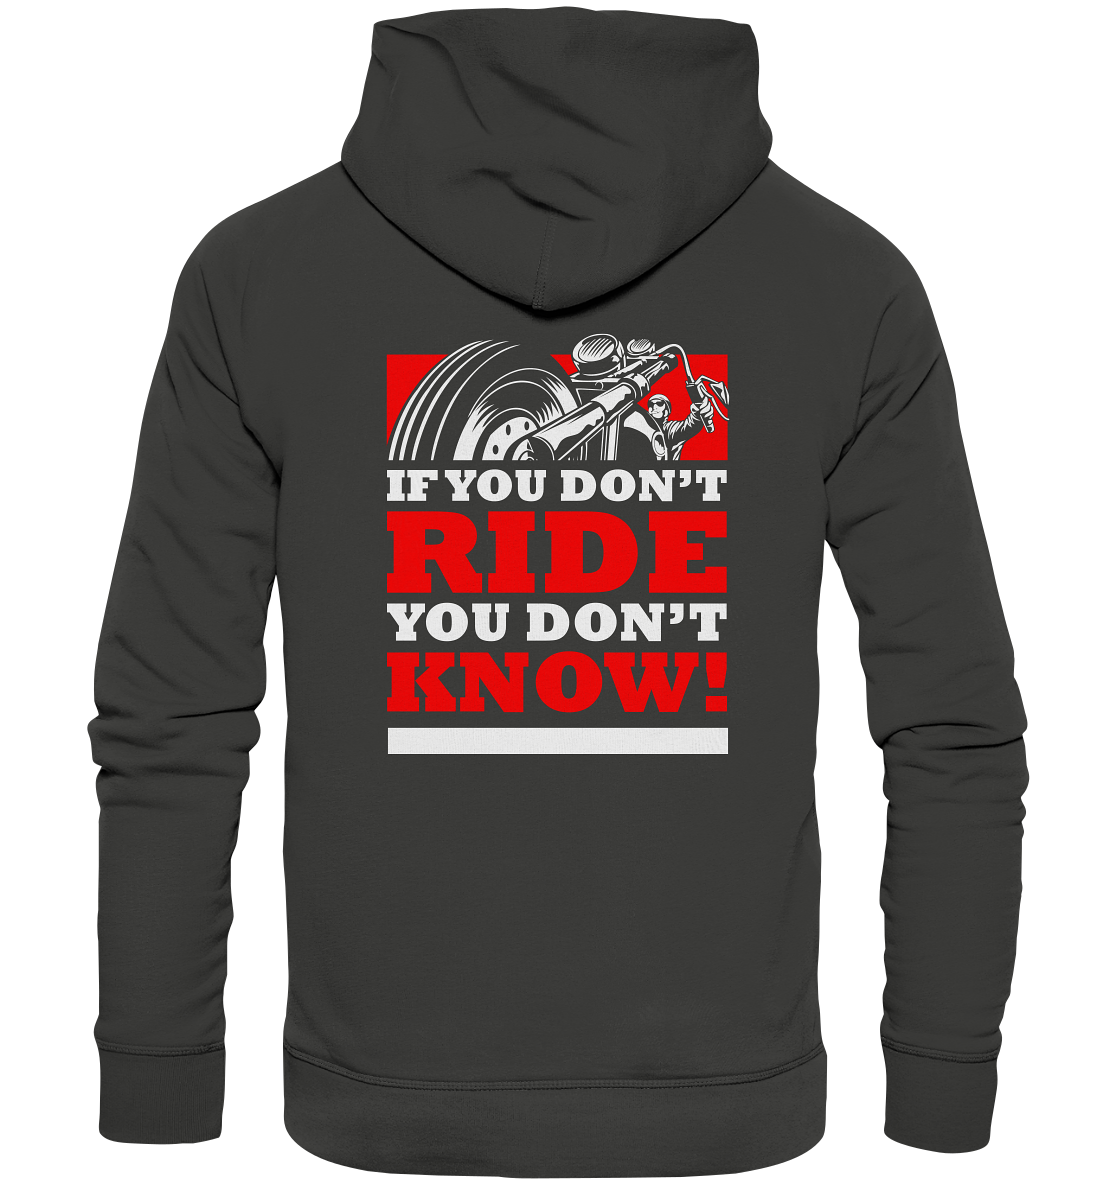 If you don't ride... - Premium Unisex Hoodie